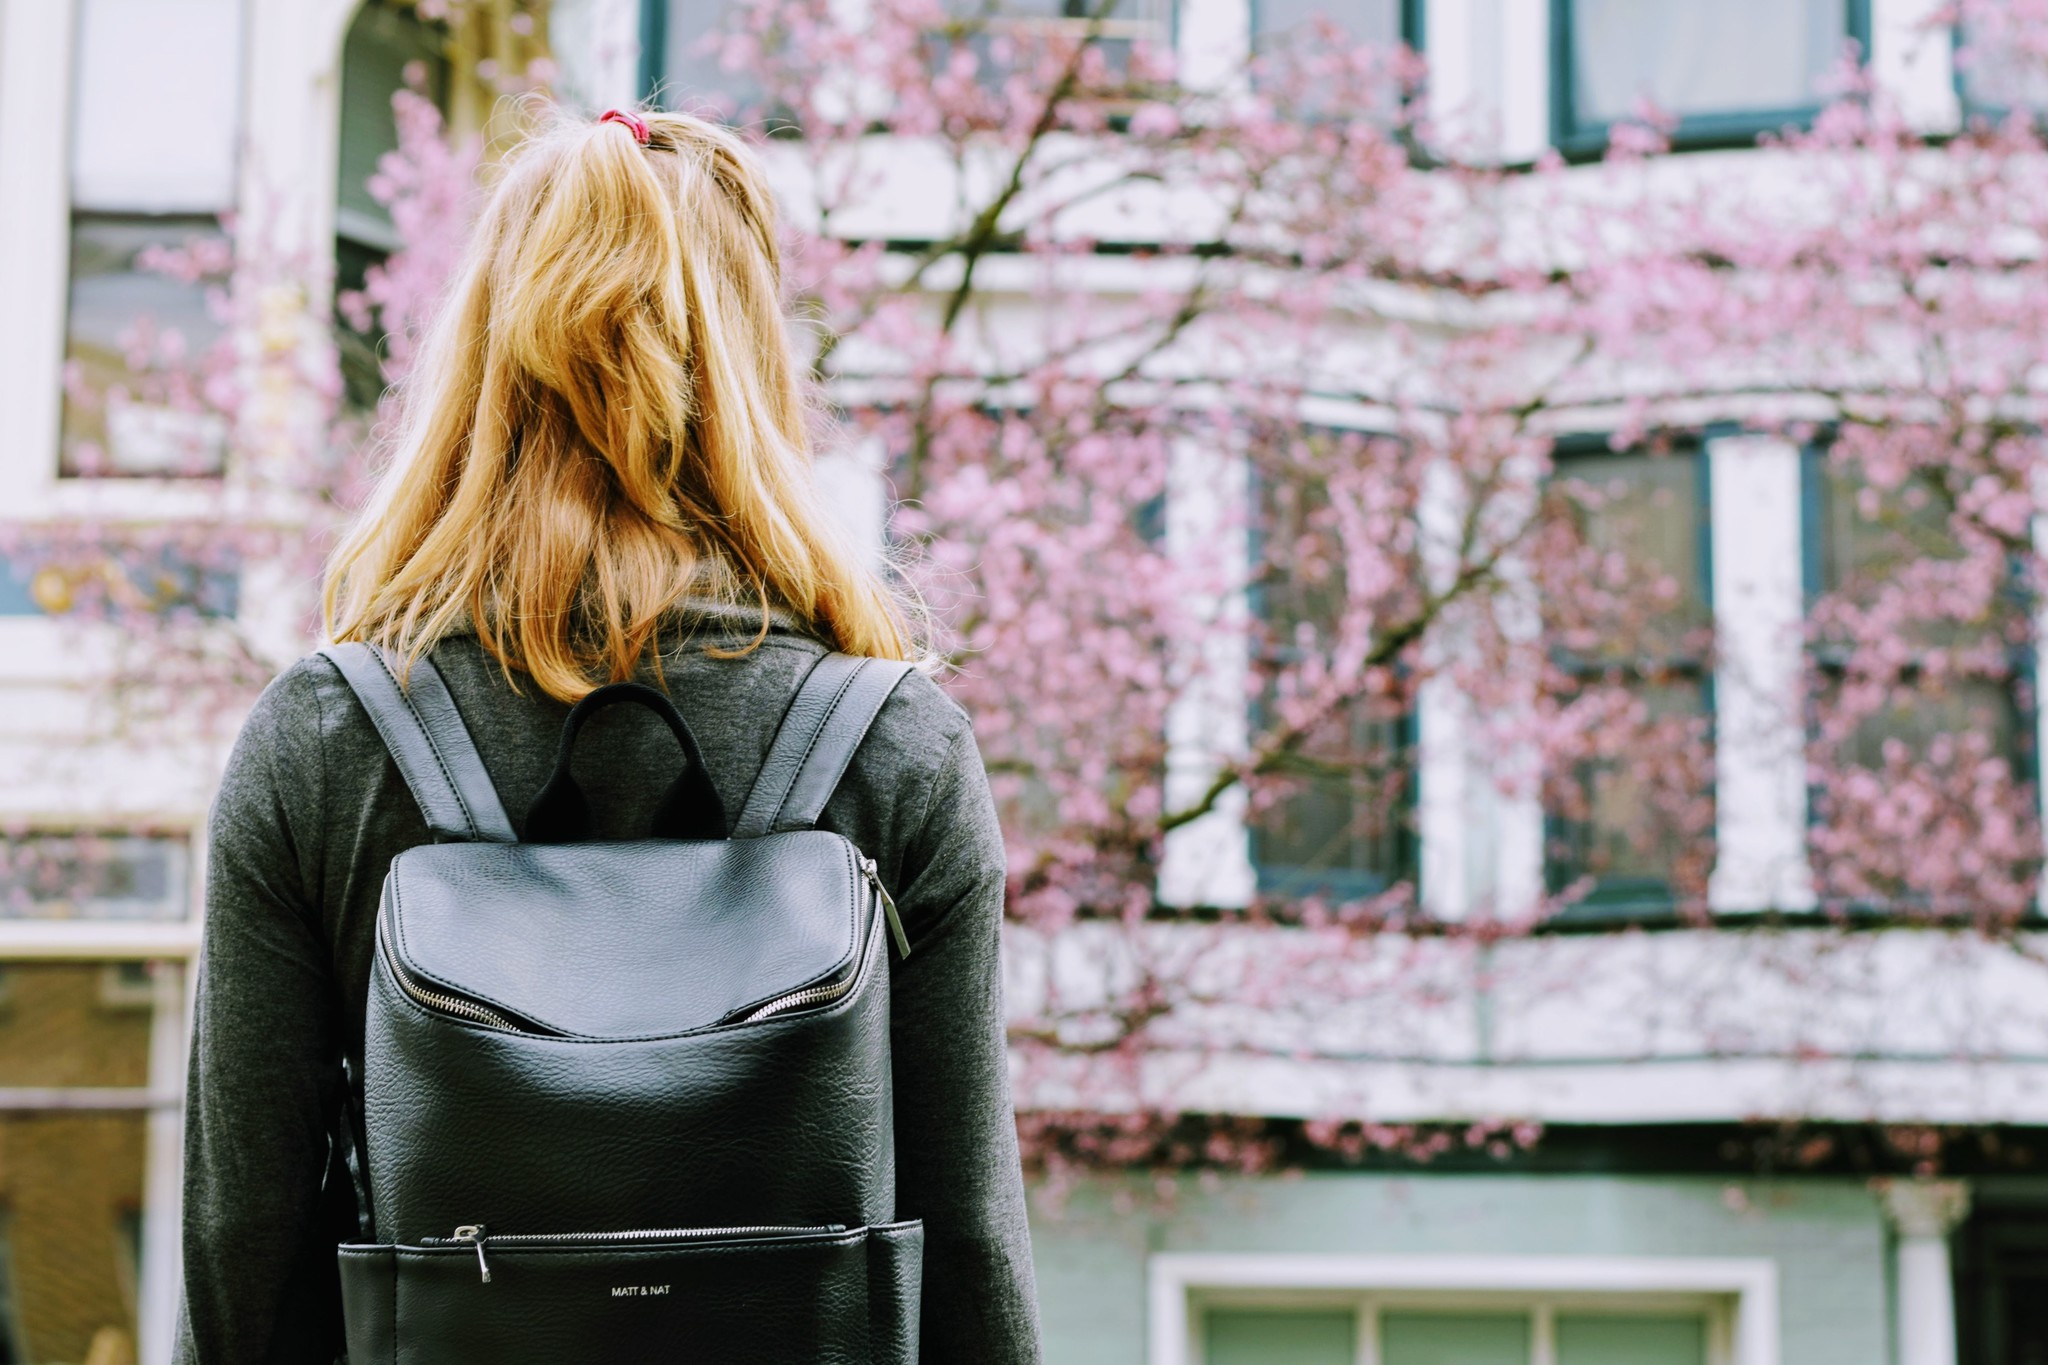 College girl with backpack